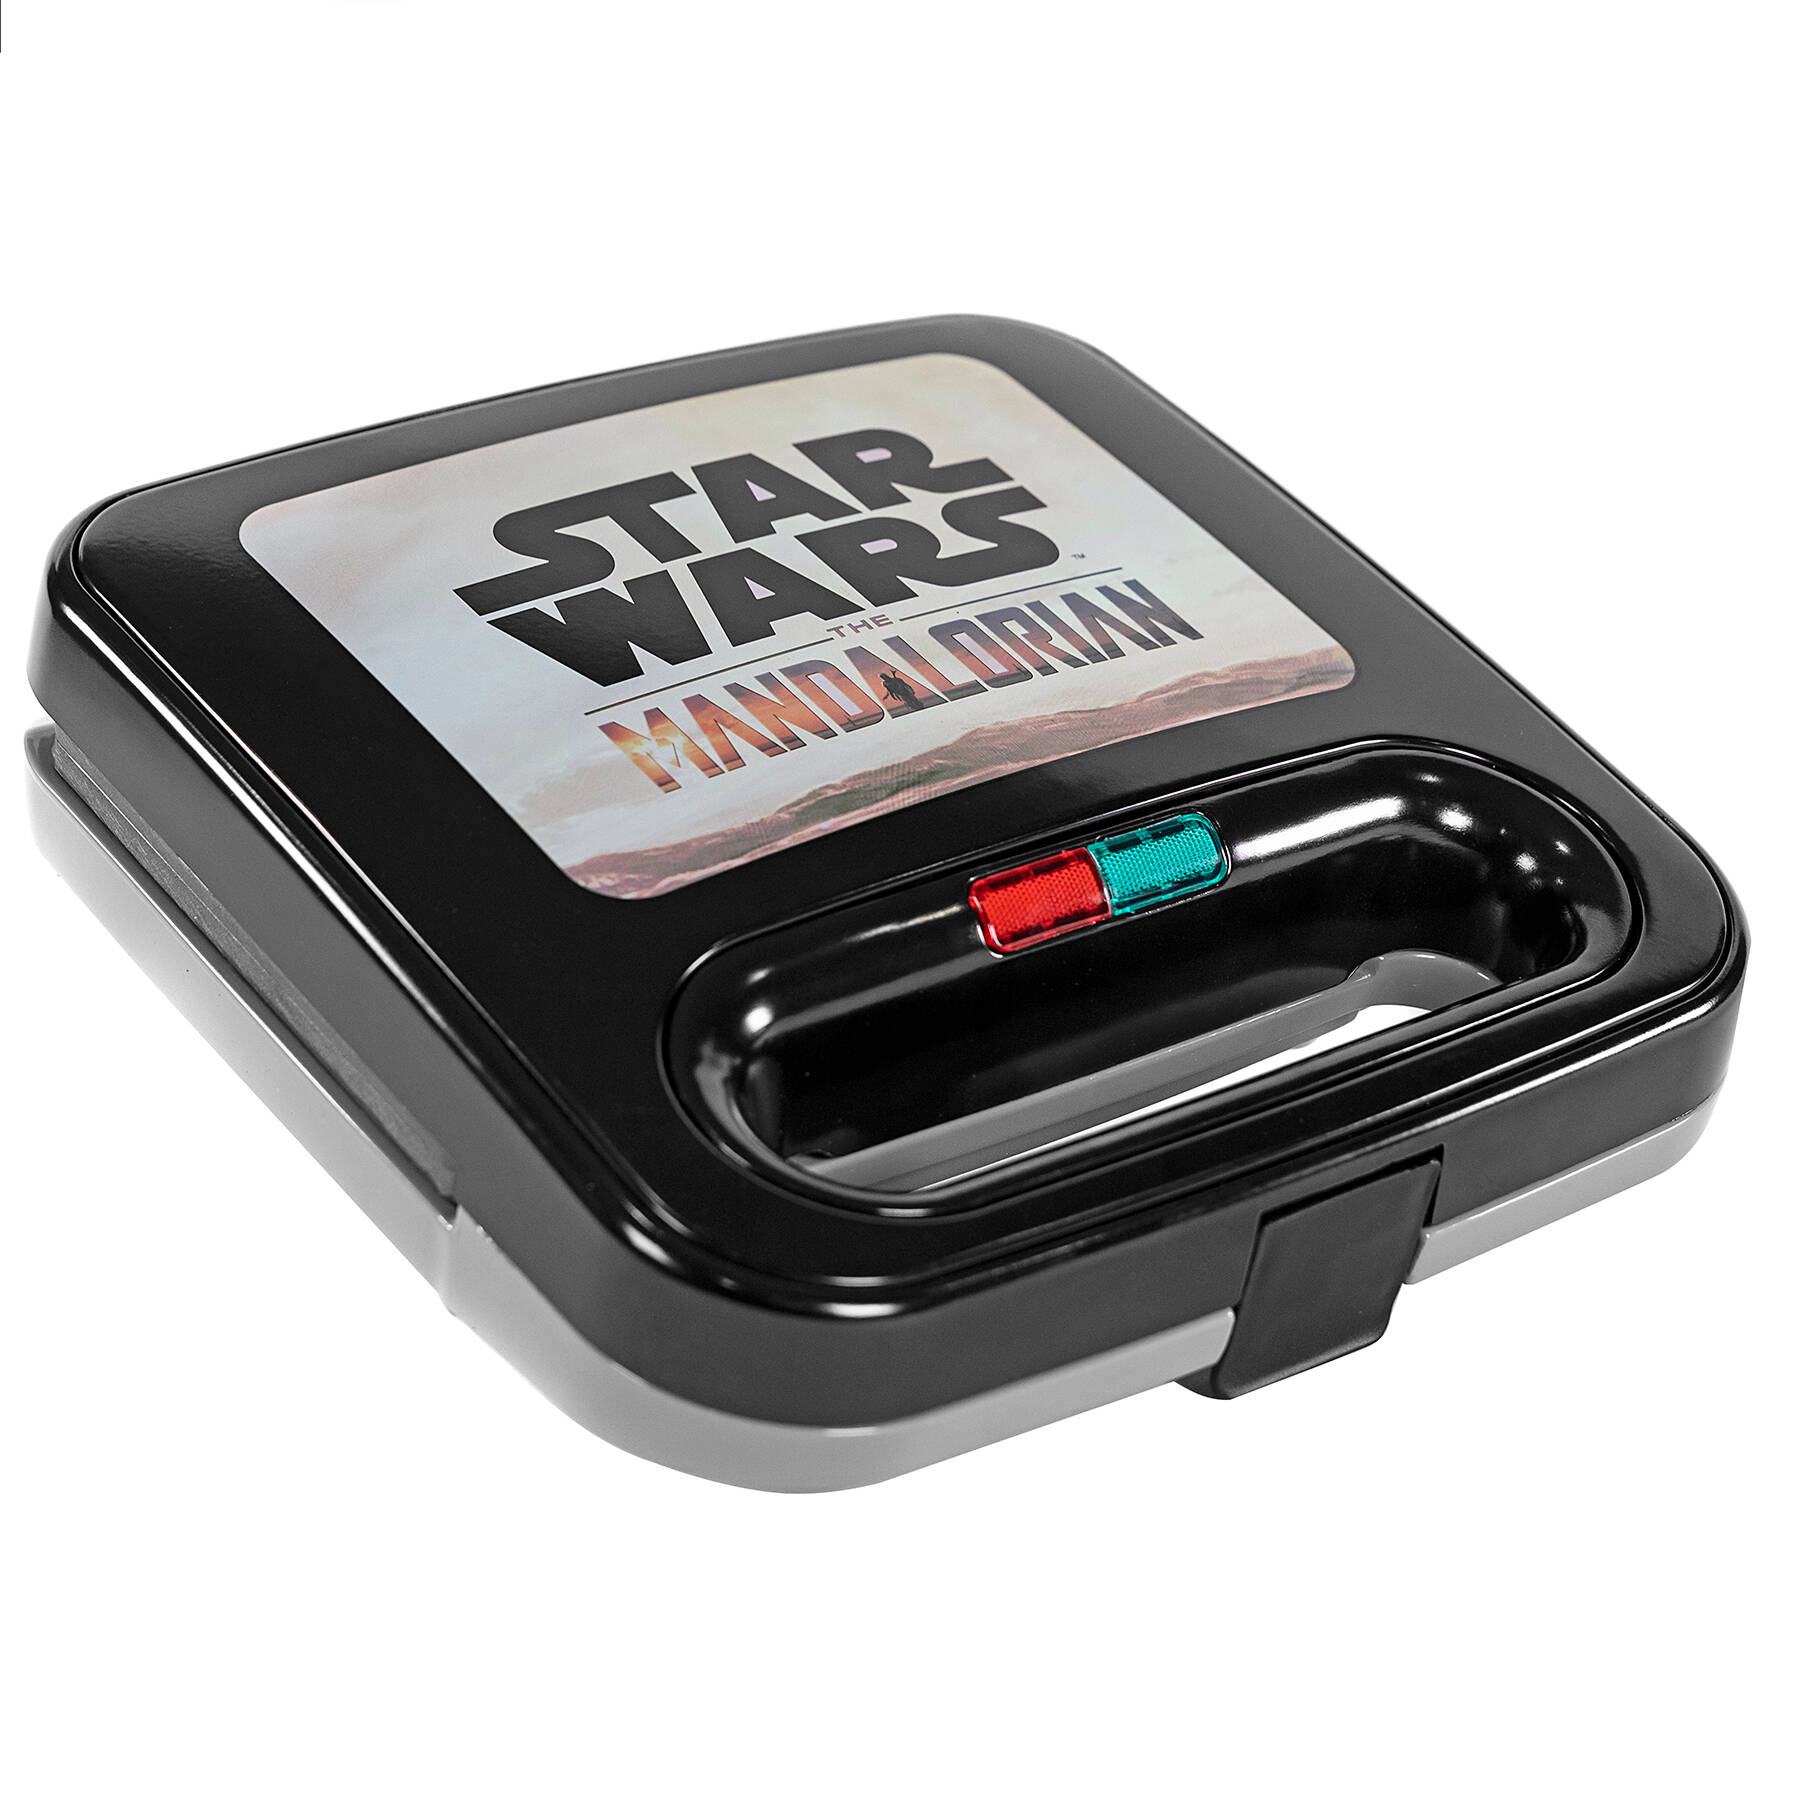 Uncanny Brands The Mandalorian Grilled Cheese Maker/Panini Press